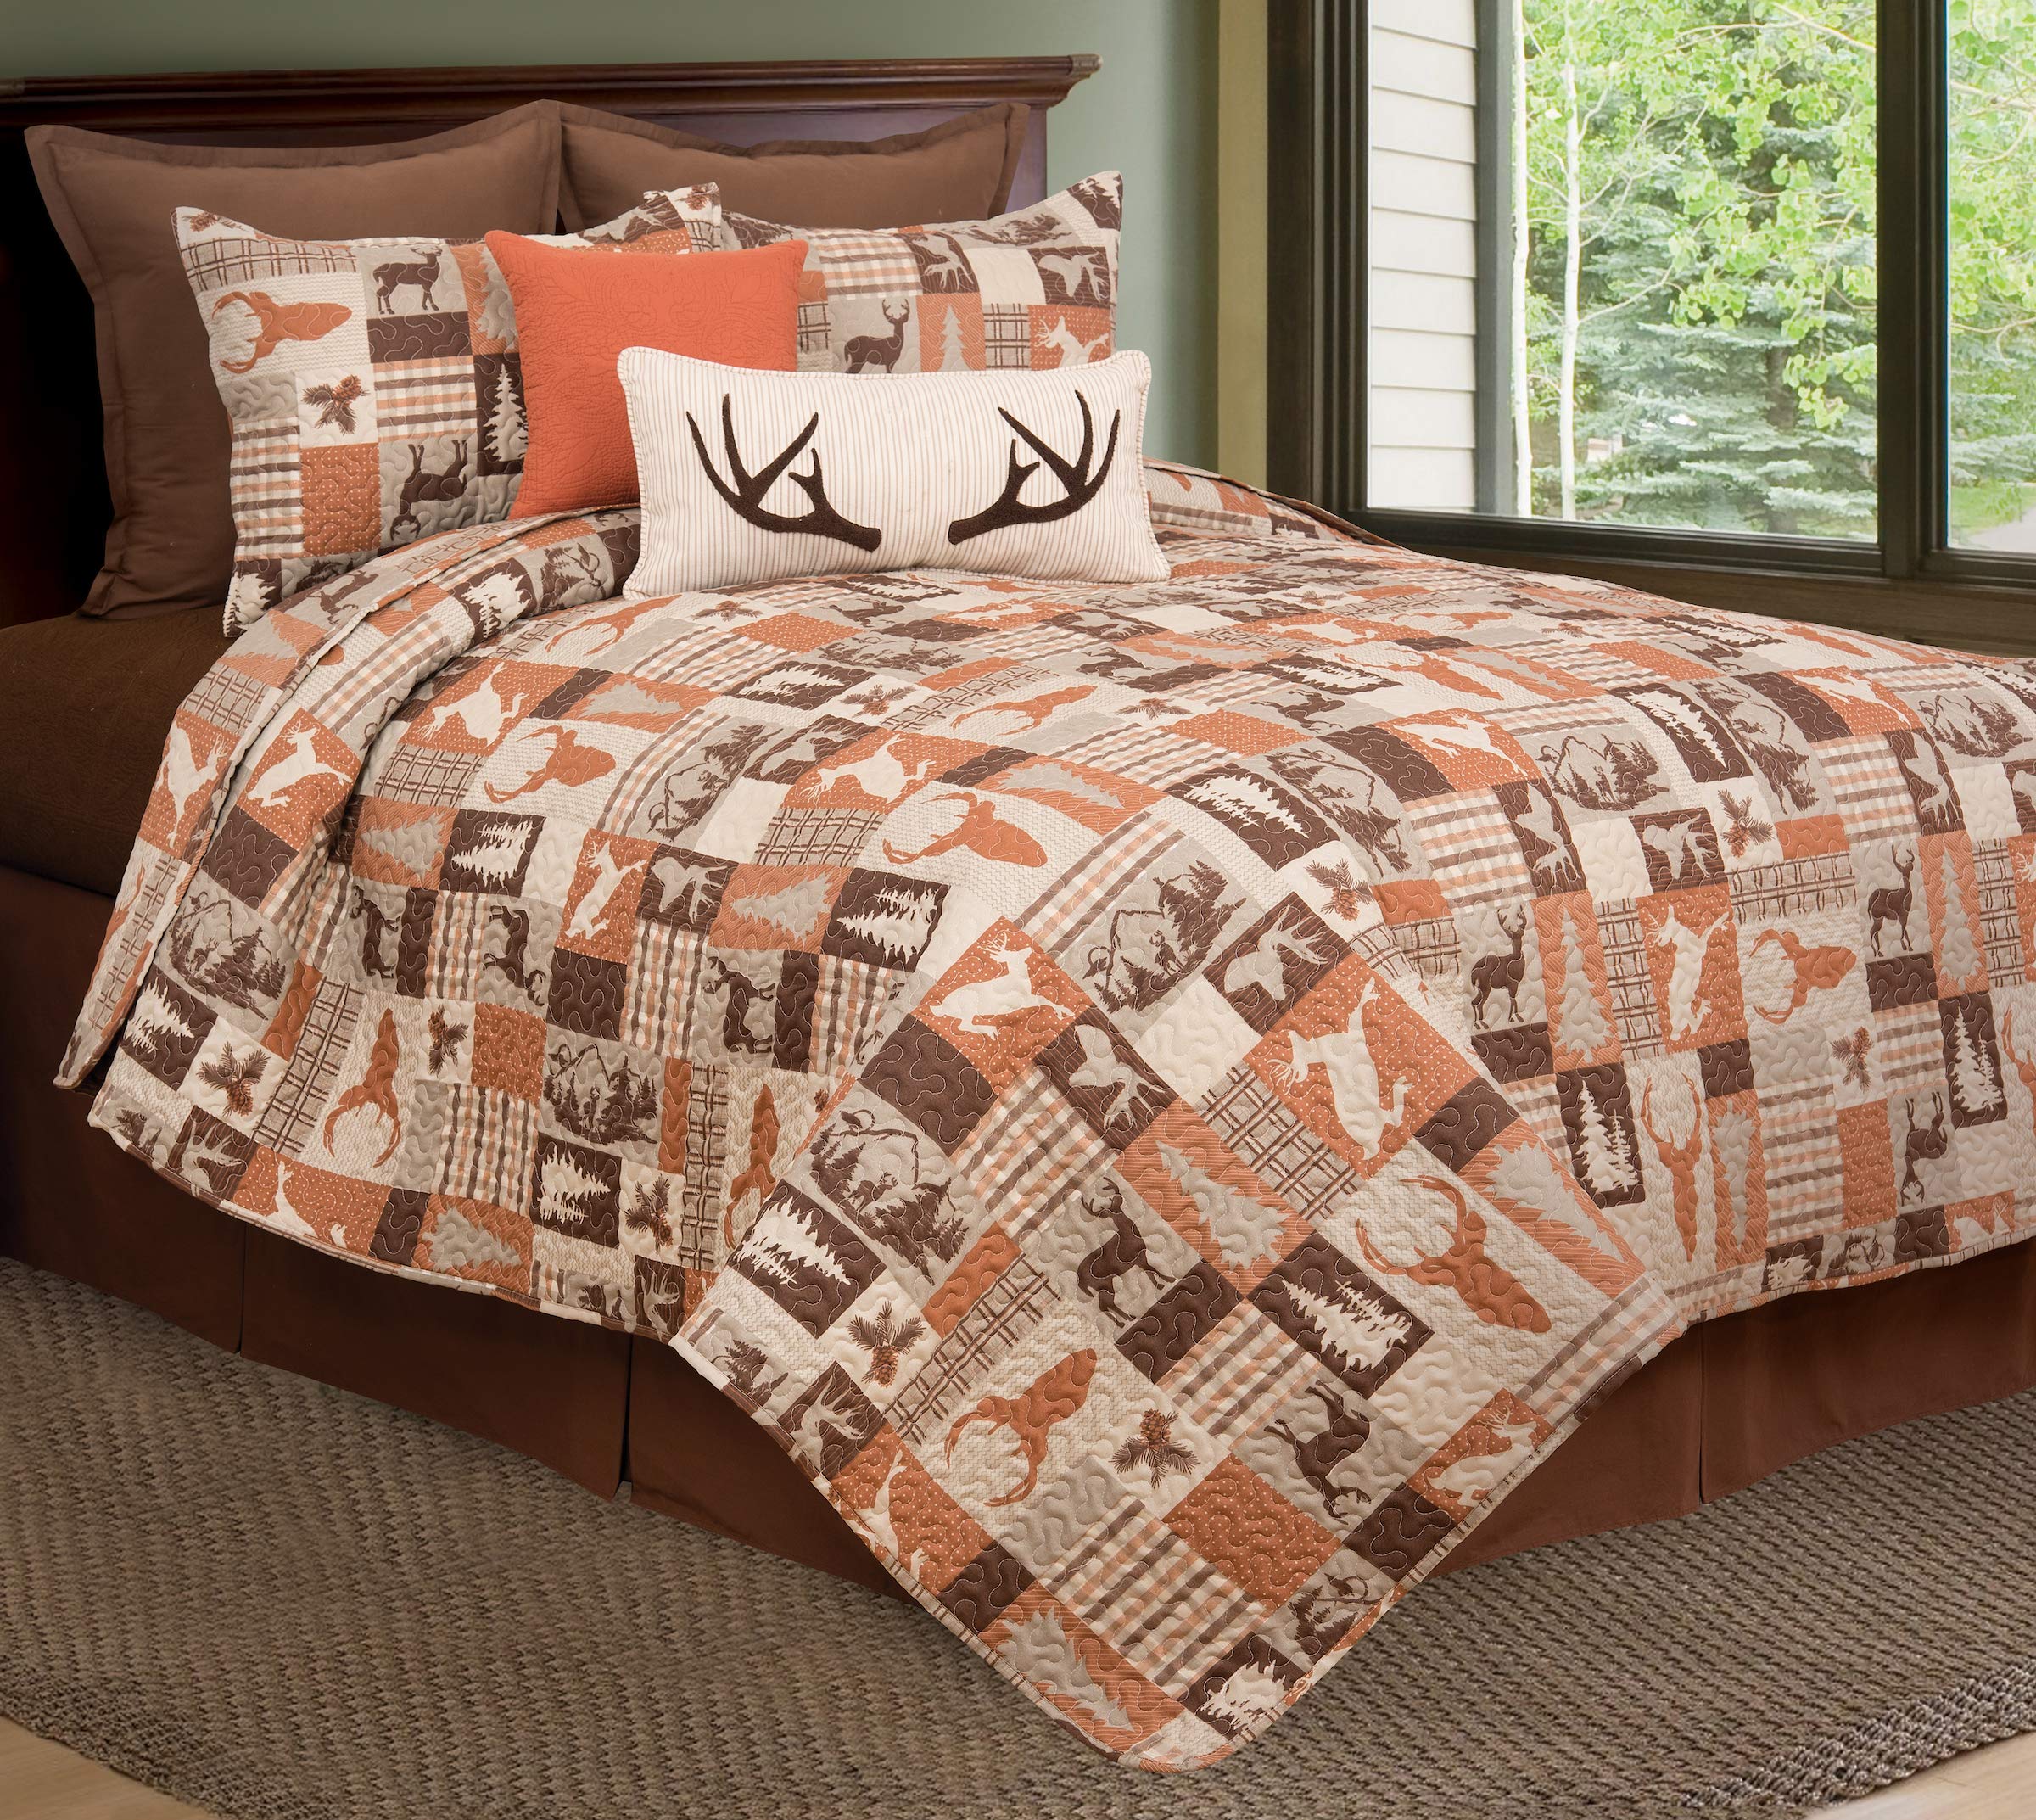 Book Cover C&F Home Rustic Buck Ridge Trail Cabin Lodge Deer Stag Pinecone Orange Brown Tan Twin 2 Piece Reversible Quilt Coverlet Set Twin 2 Piece Set Brown